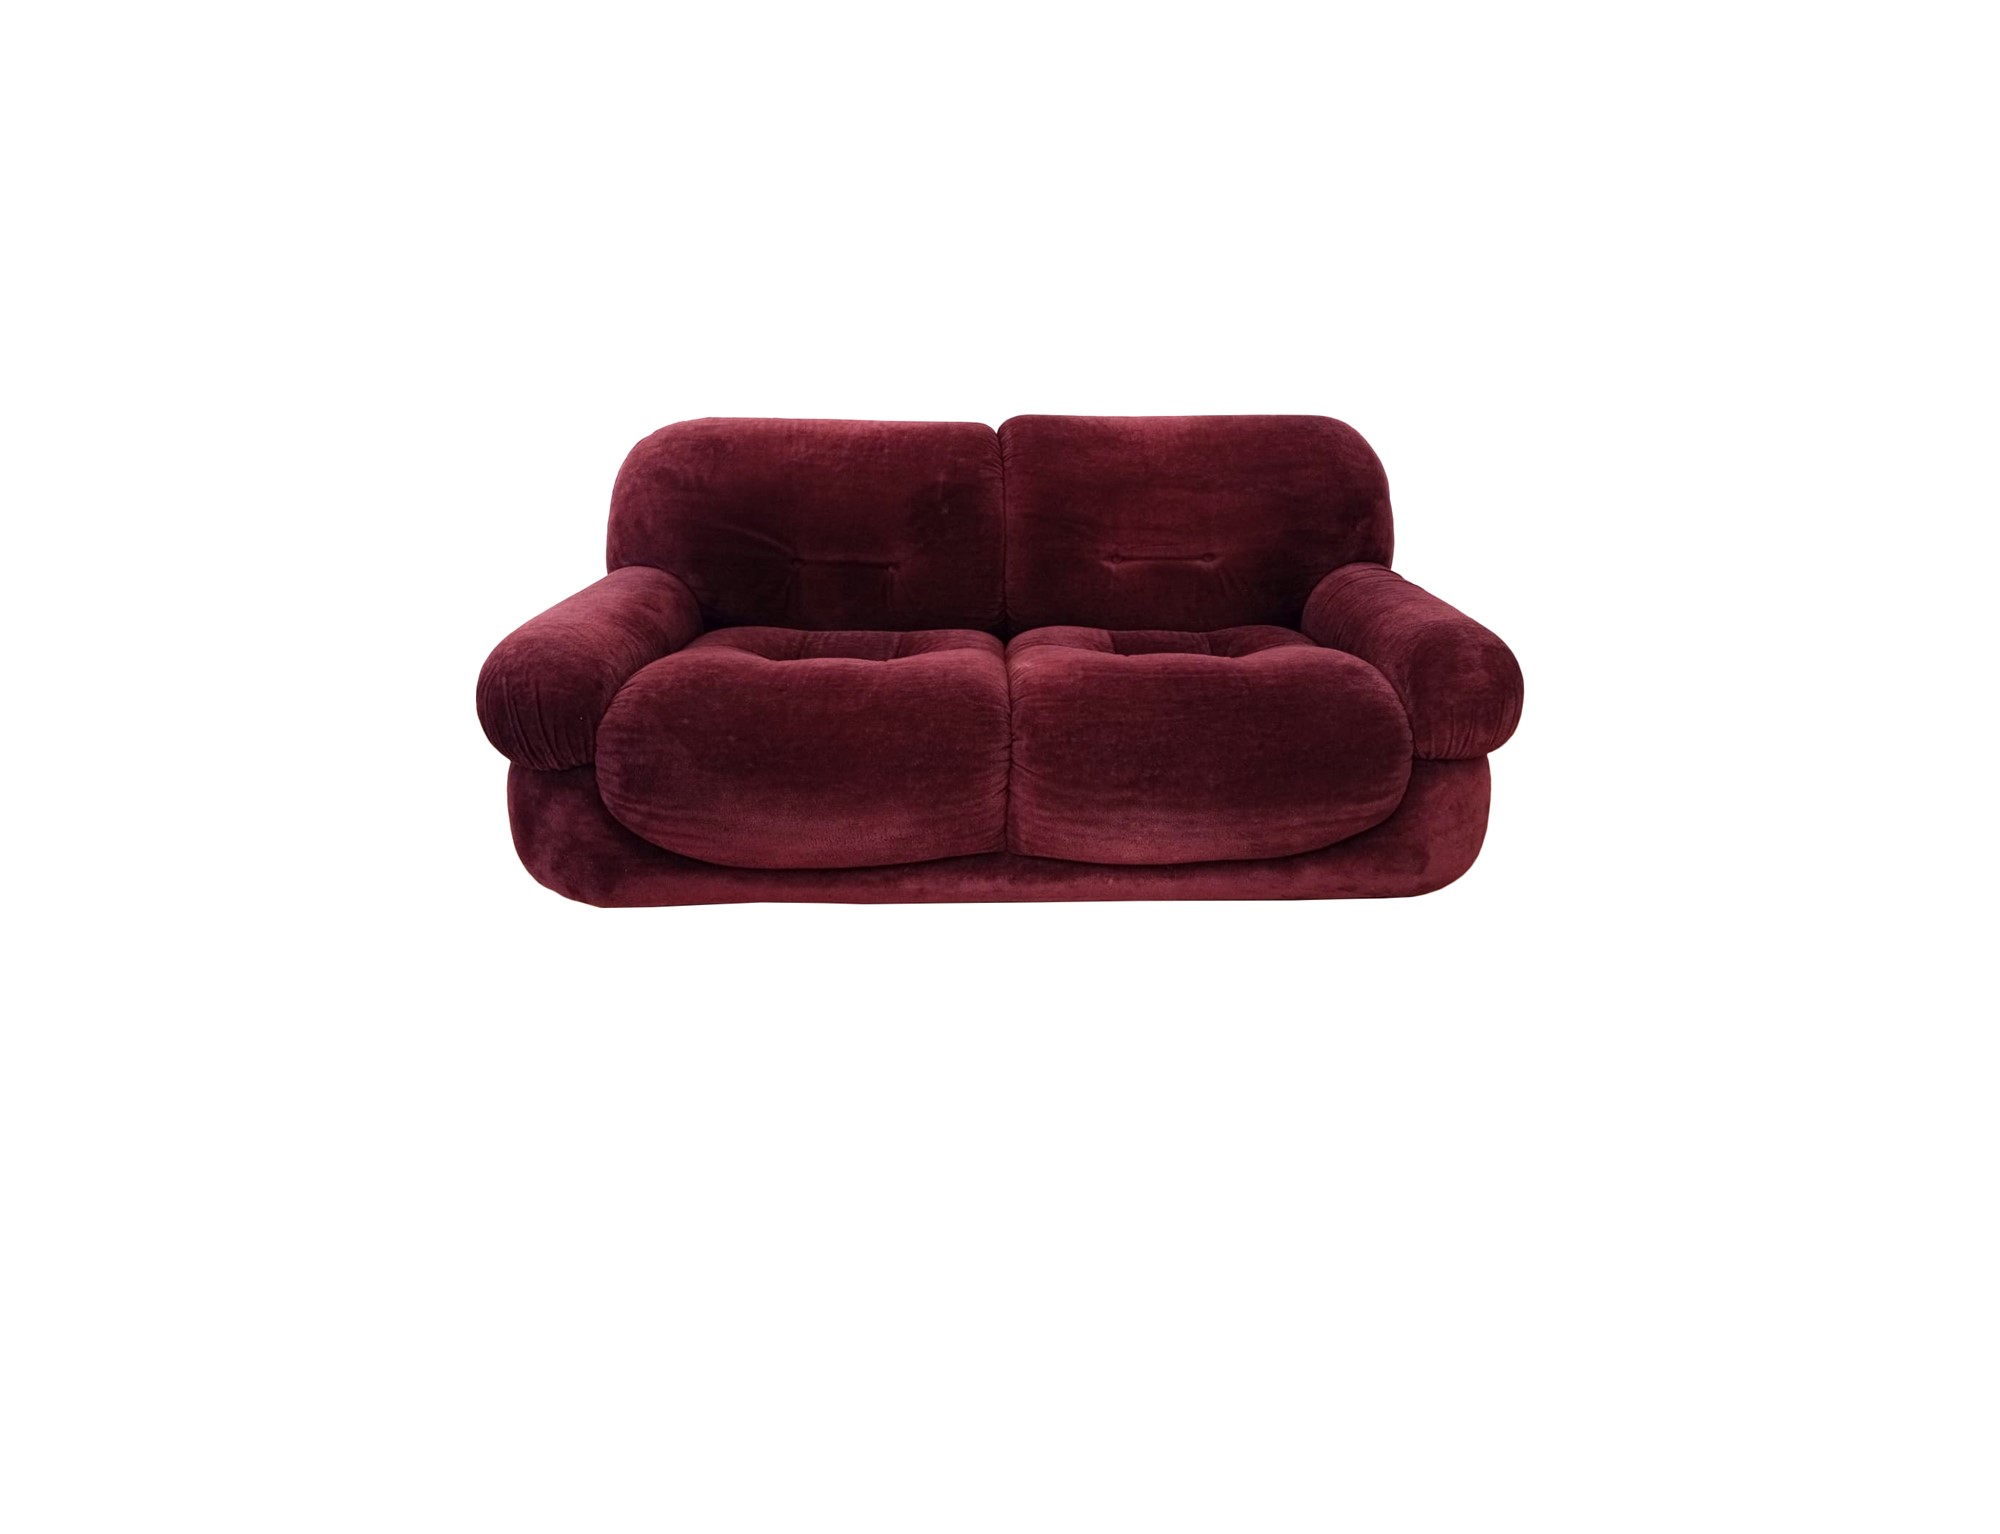 Two seater Sapporo sofa - Image 10 of 11